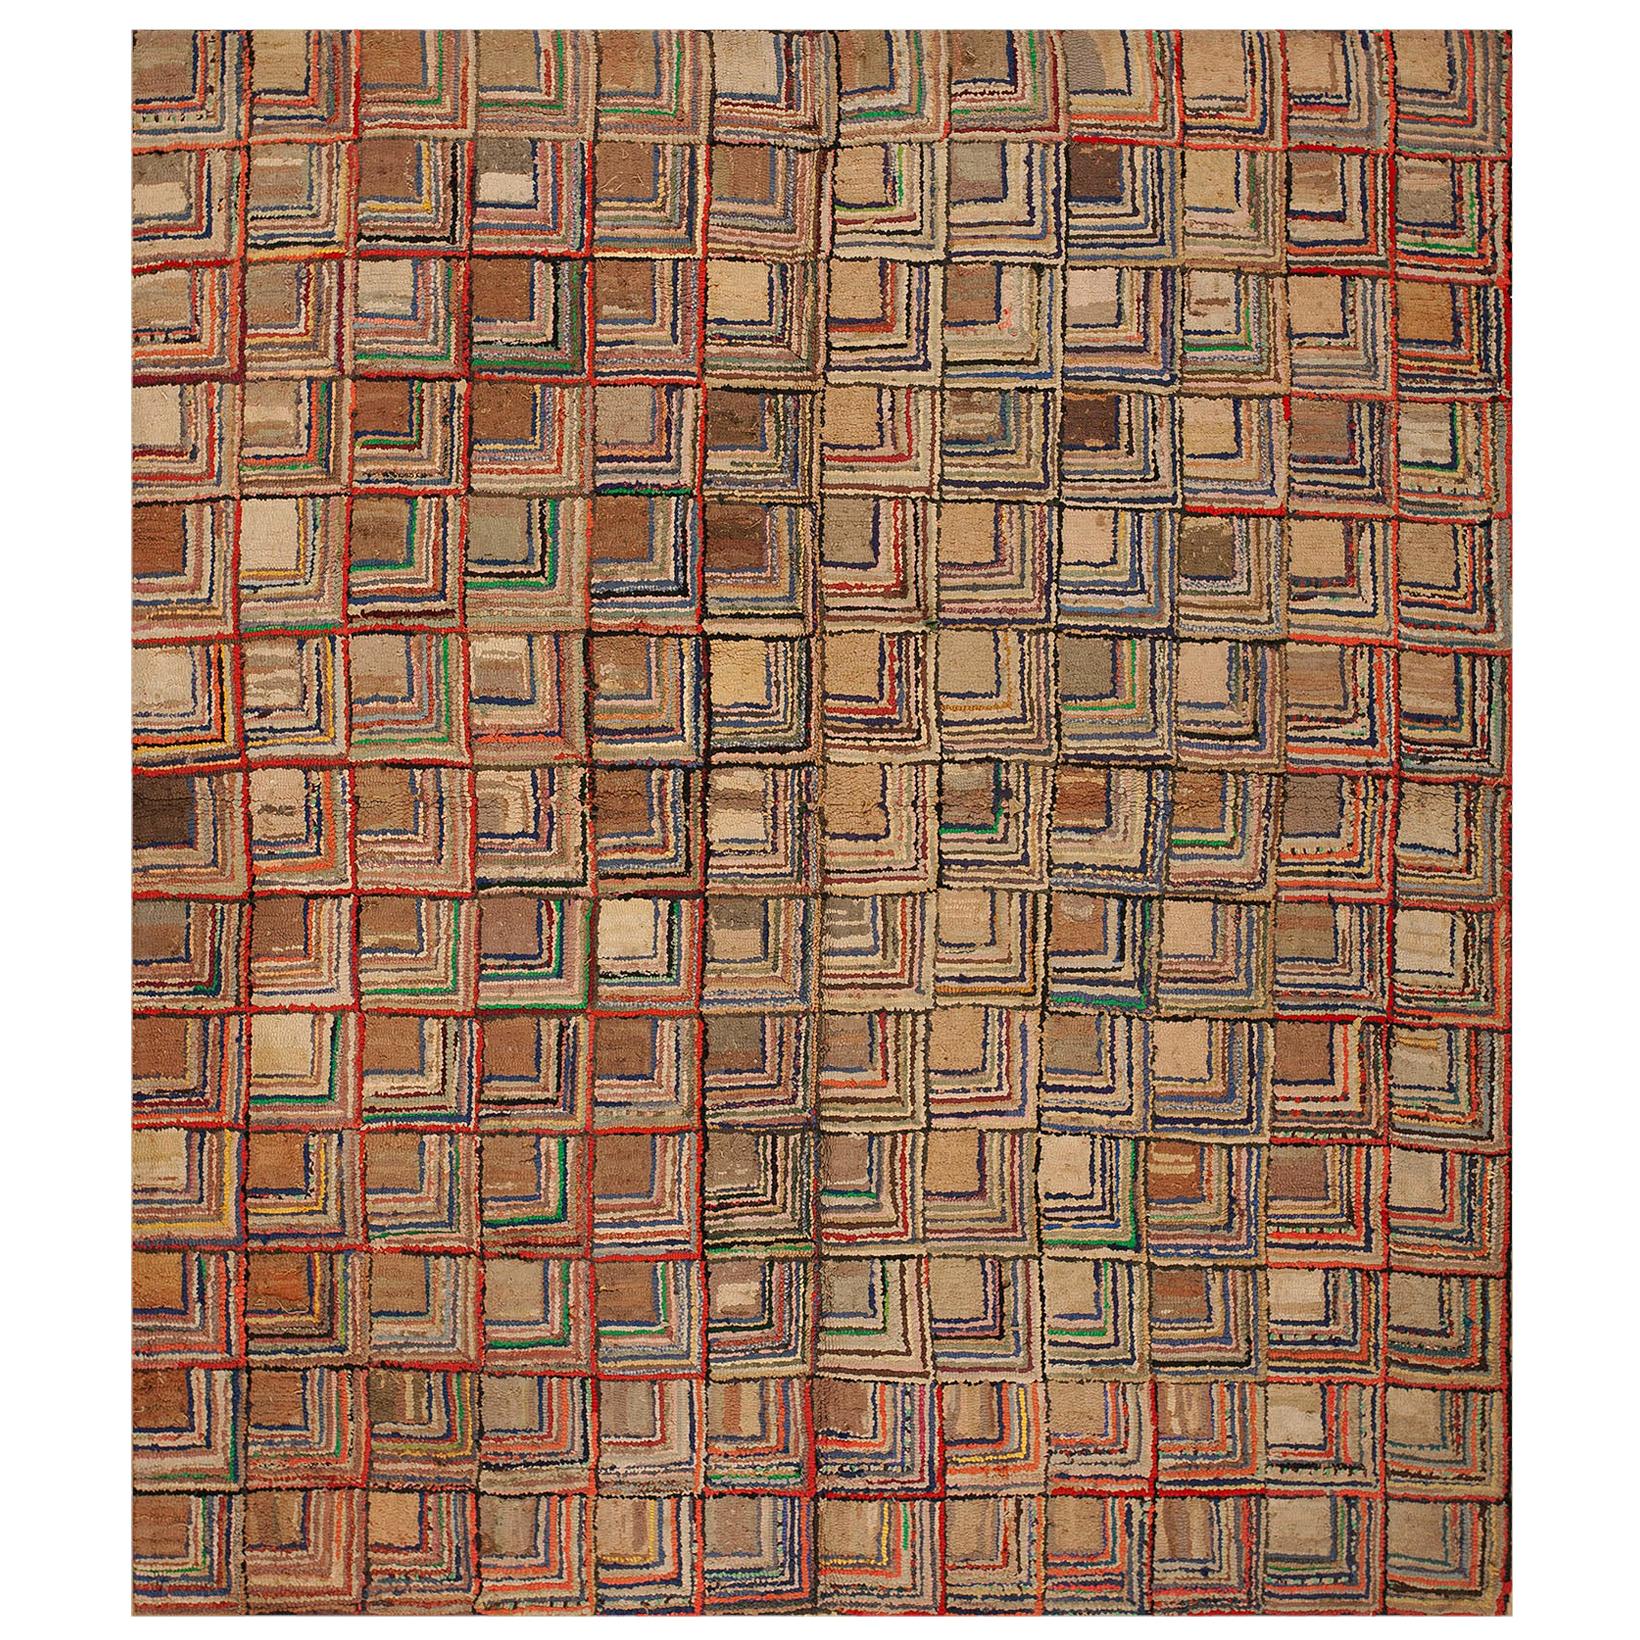 Early 20th Century American Hooked Rug ( 5'10" x 6'8" - 178 x 203 )